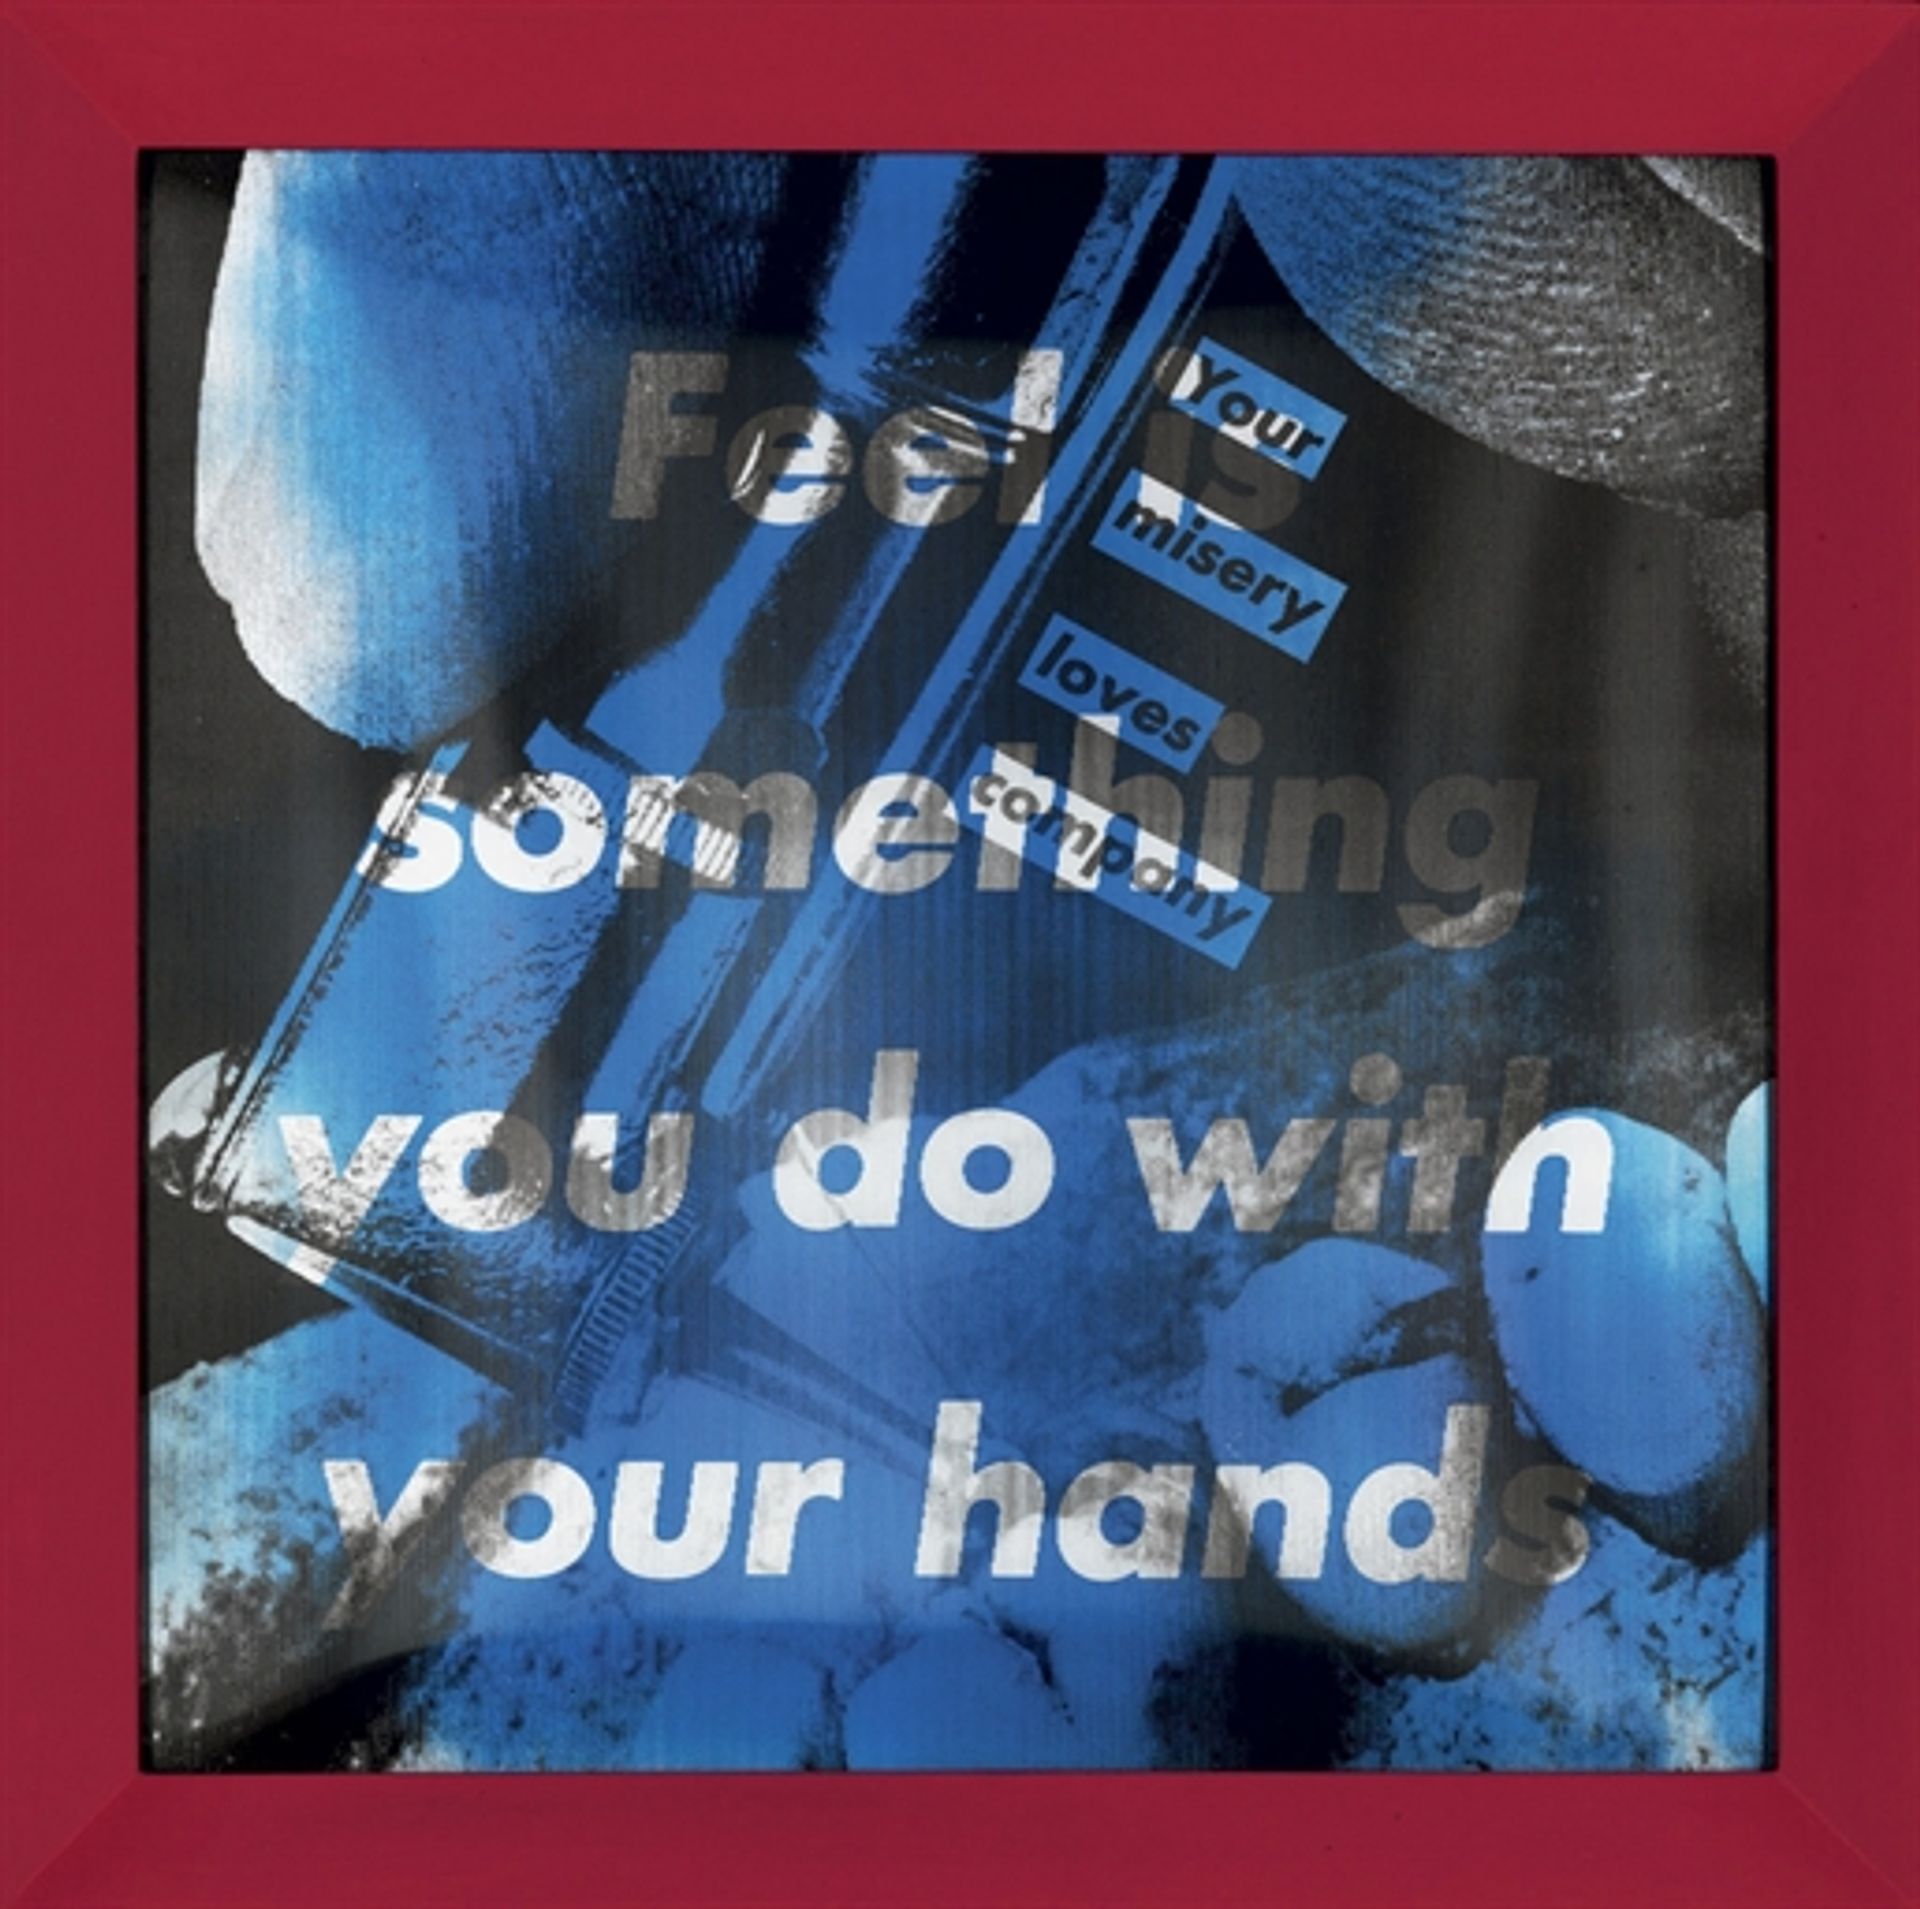 Barbara Kruger Untitled (Your Misery Loves Company / Feel is Something You Do With Your Hands), 1985, is for sale on LiveArt Market now Courtesy of the artist and LiveArt Market